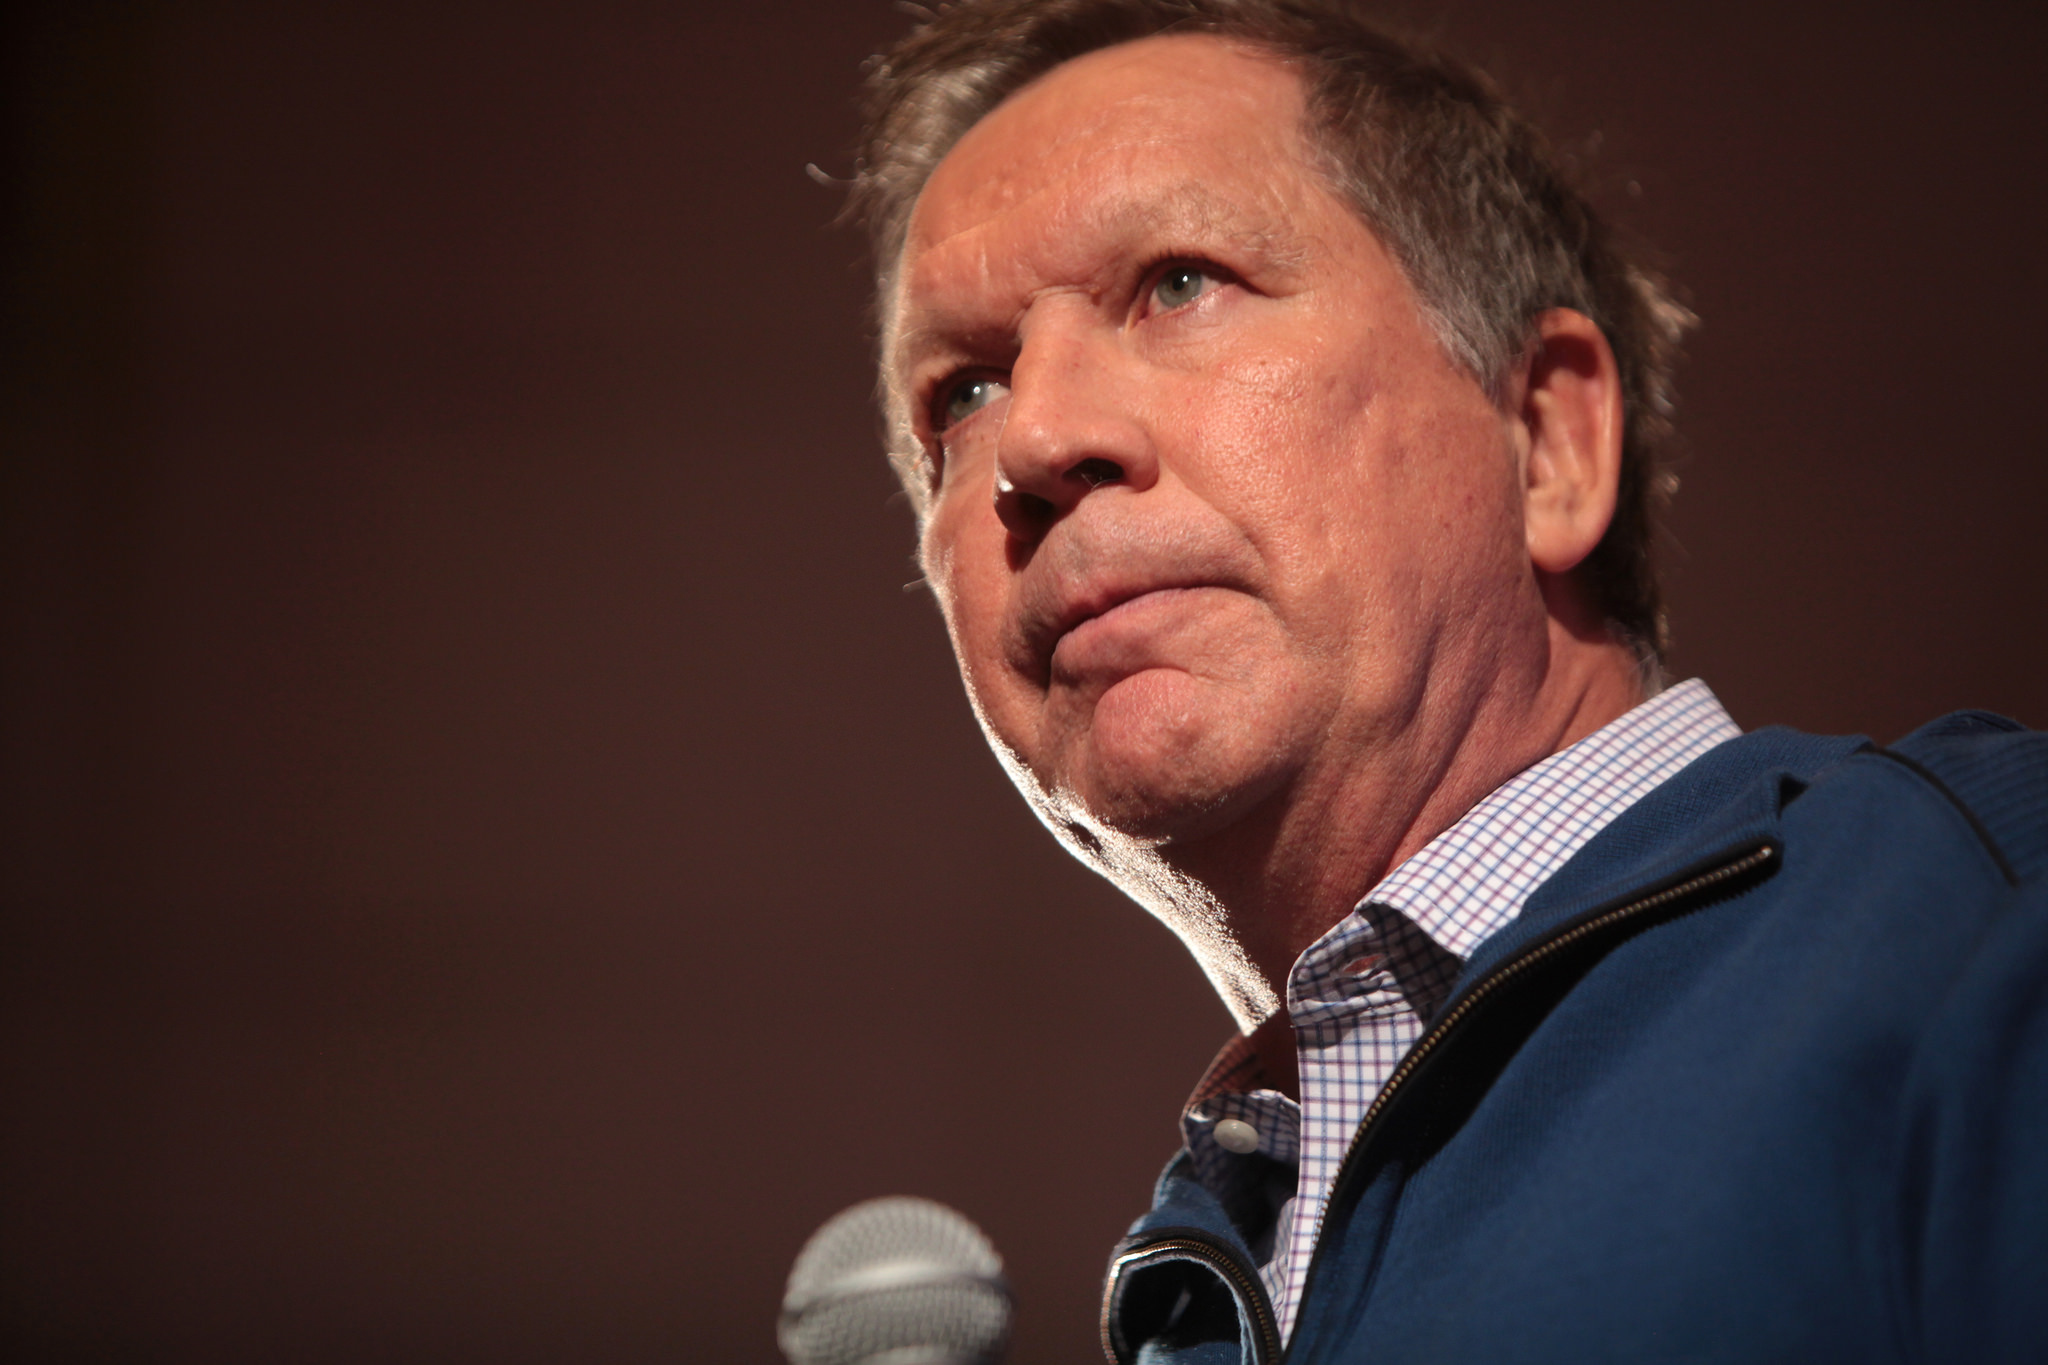 Kasich is No Moderate on Inequality